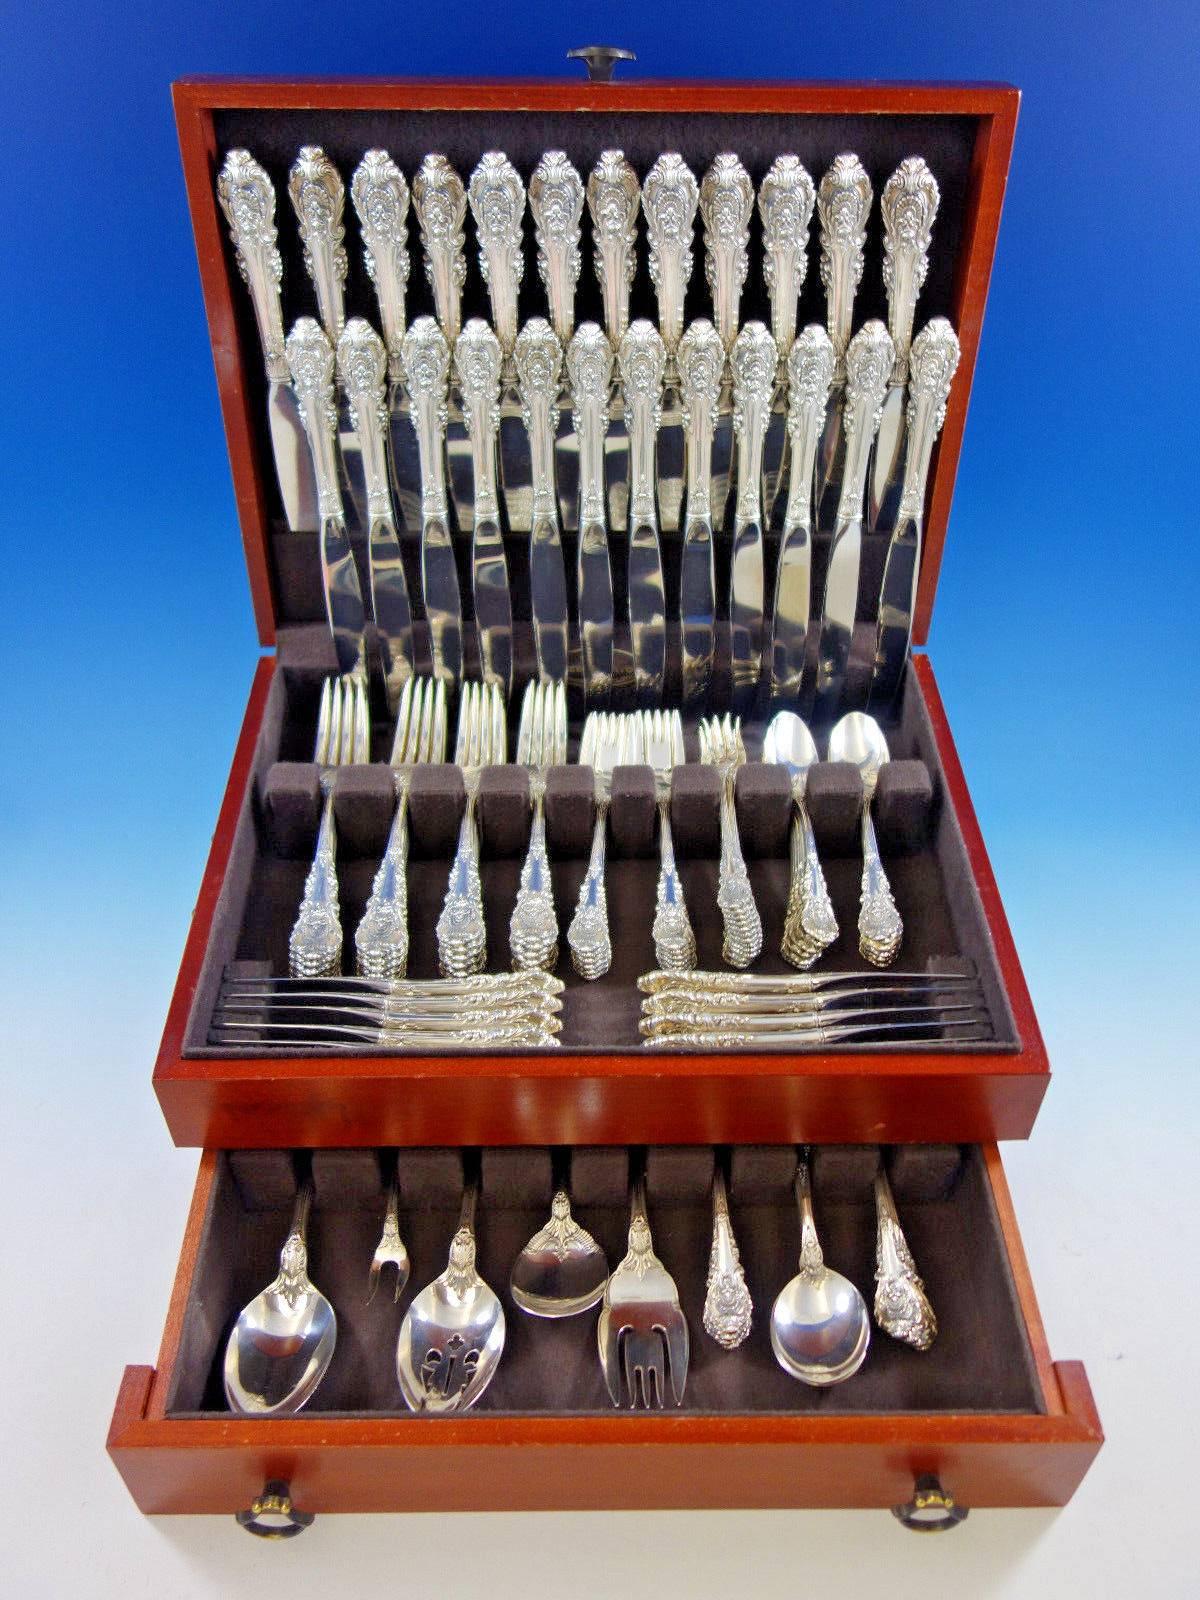 Huge Dinner and Luncheon Size Sir Christopher by Wallace Sterling silver flatware set - 113 pieces. This set includes: 12 dinner size knives, 9 1/2